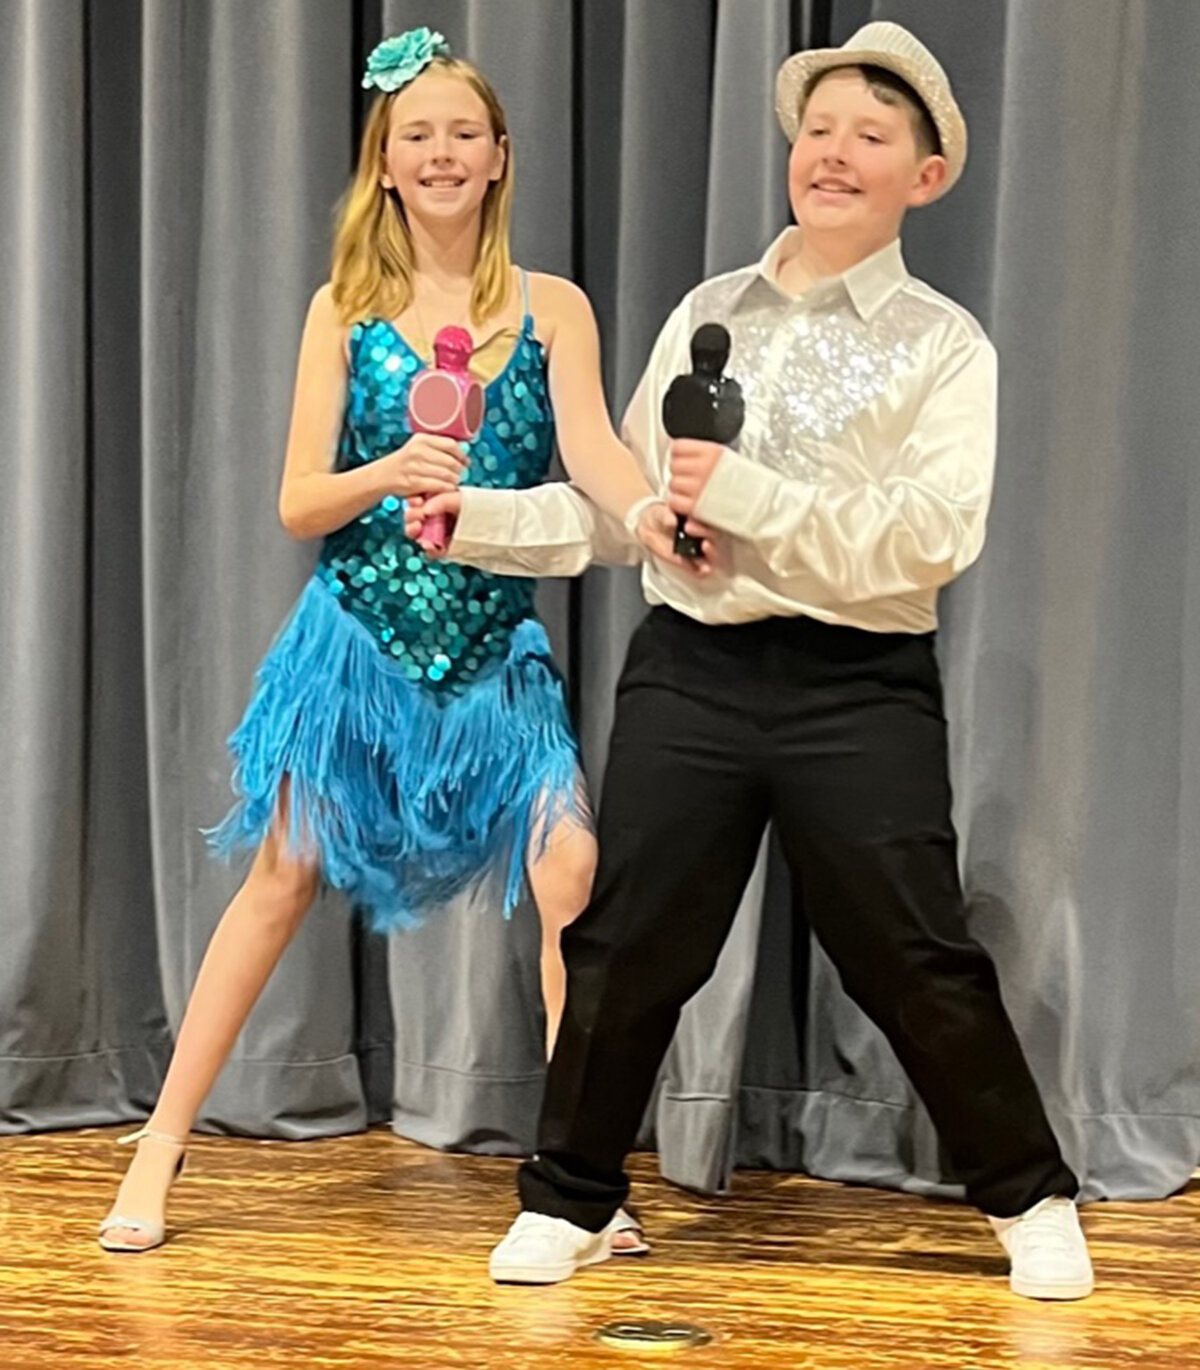 Alexis Pape as Sharpay, left, and Logan Edick as Ryan rehearse a scene from Disney’s “High School Musical” to prepare for their performance on stage at 6:30 p.m. March 23 and 24 in the Strough Junior High School auditorium in Rome. The show is free with general admission.